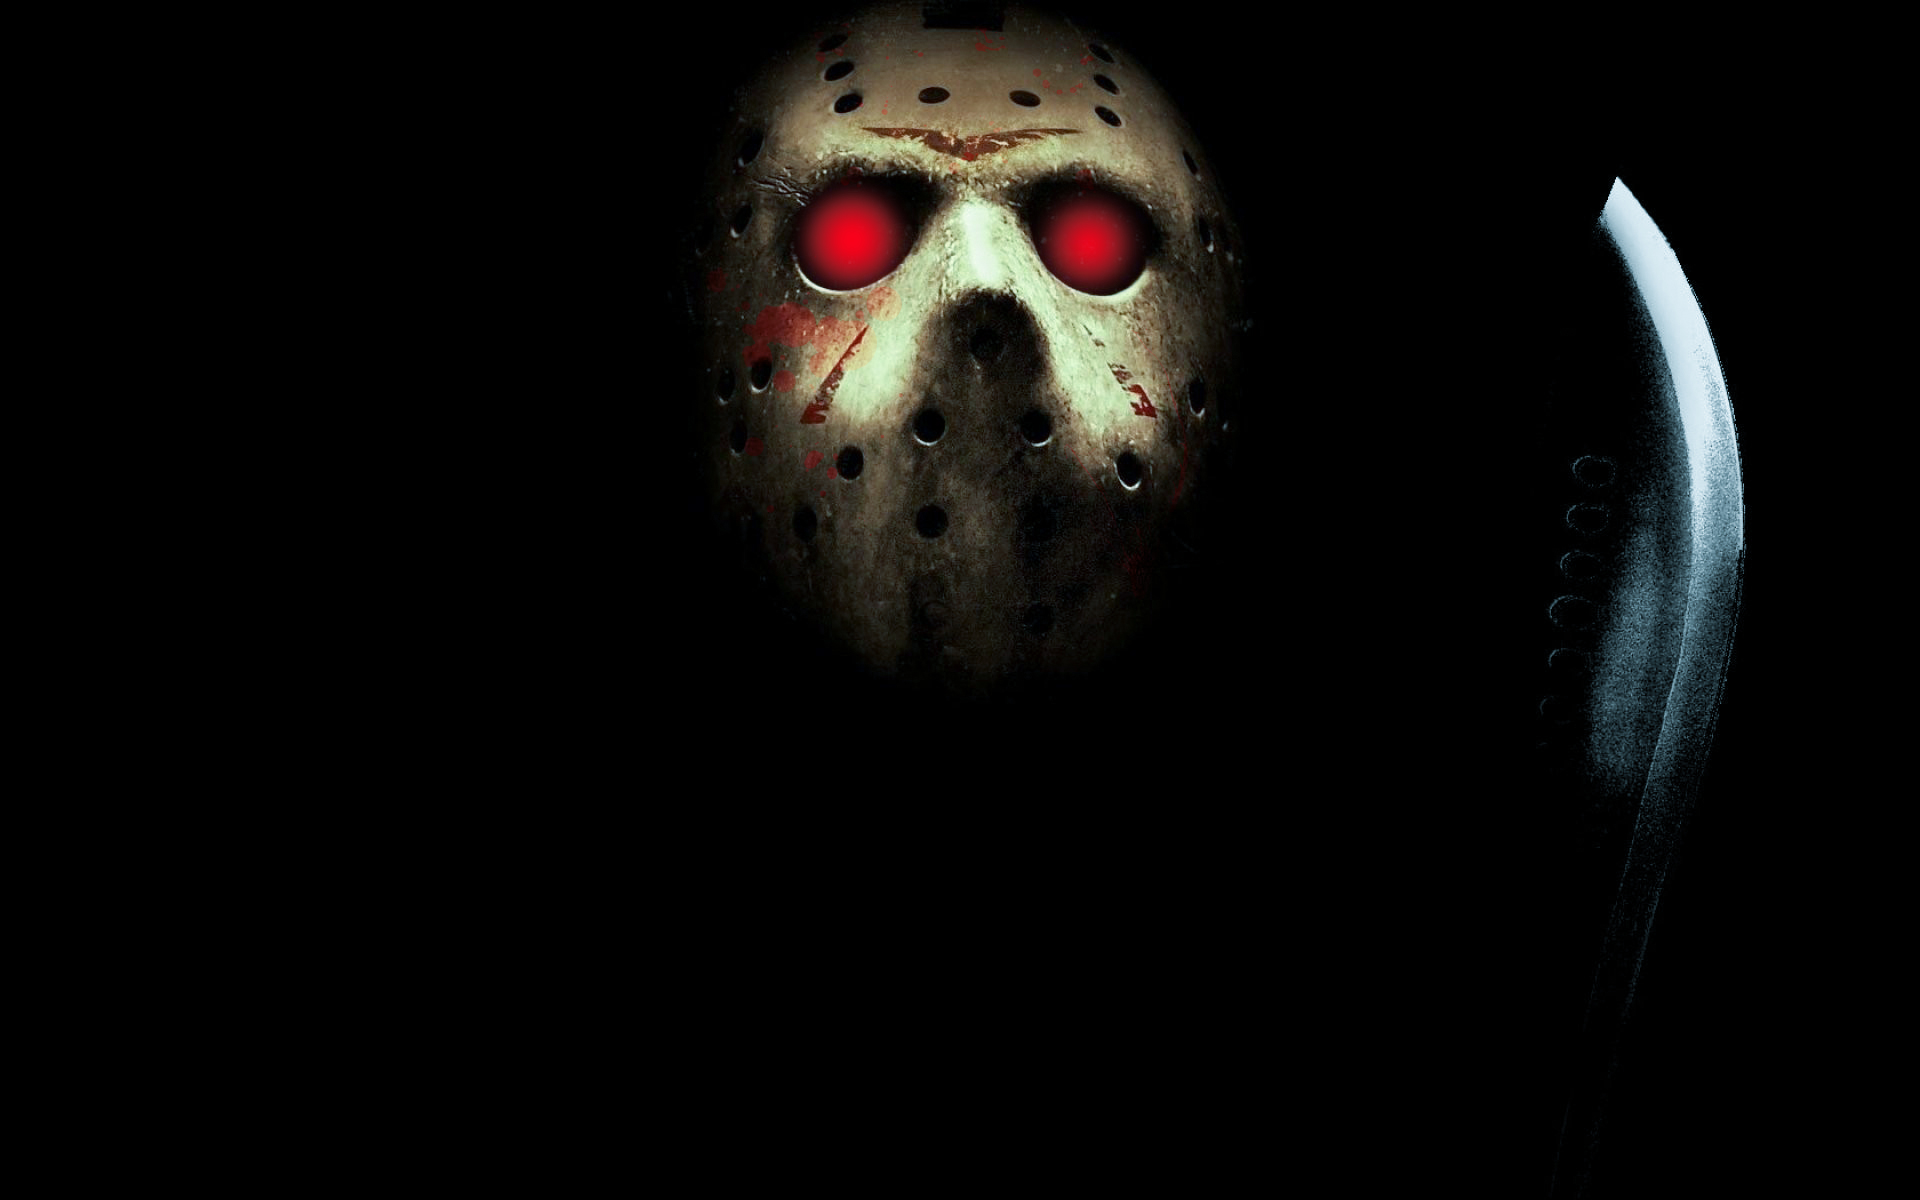 movie, friday the 13th (2009), friday the 13th, jason voorhees, machete, mask, red eyes